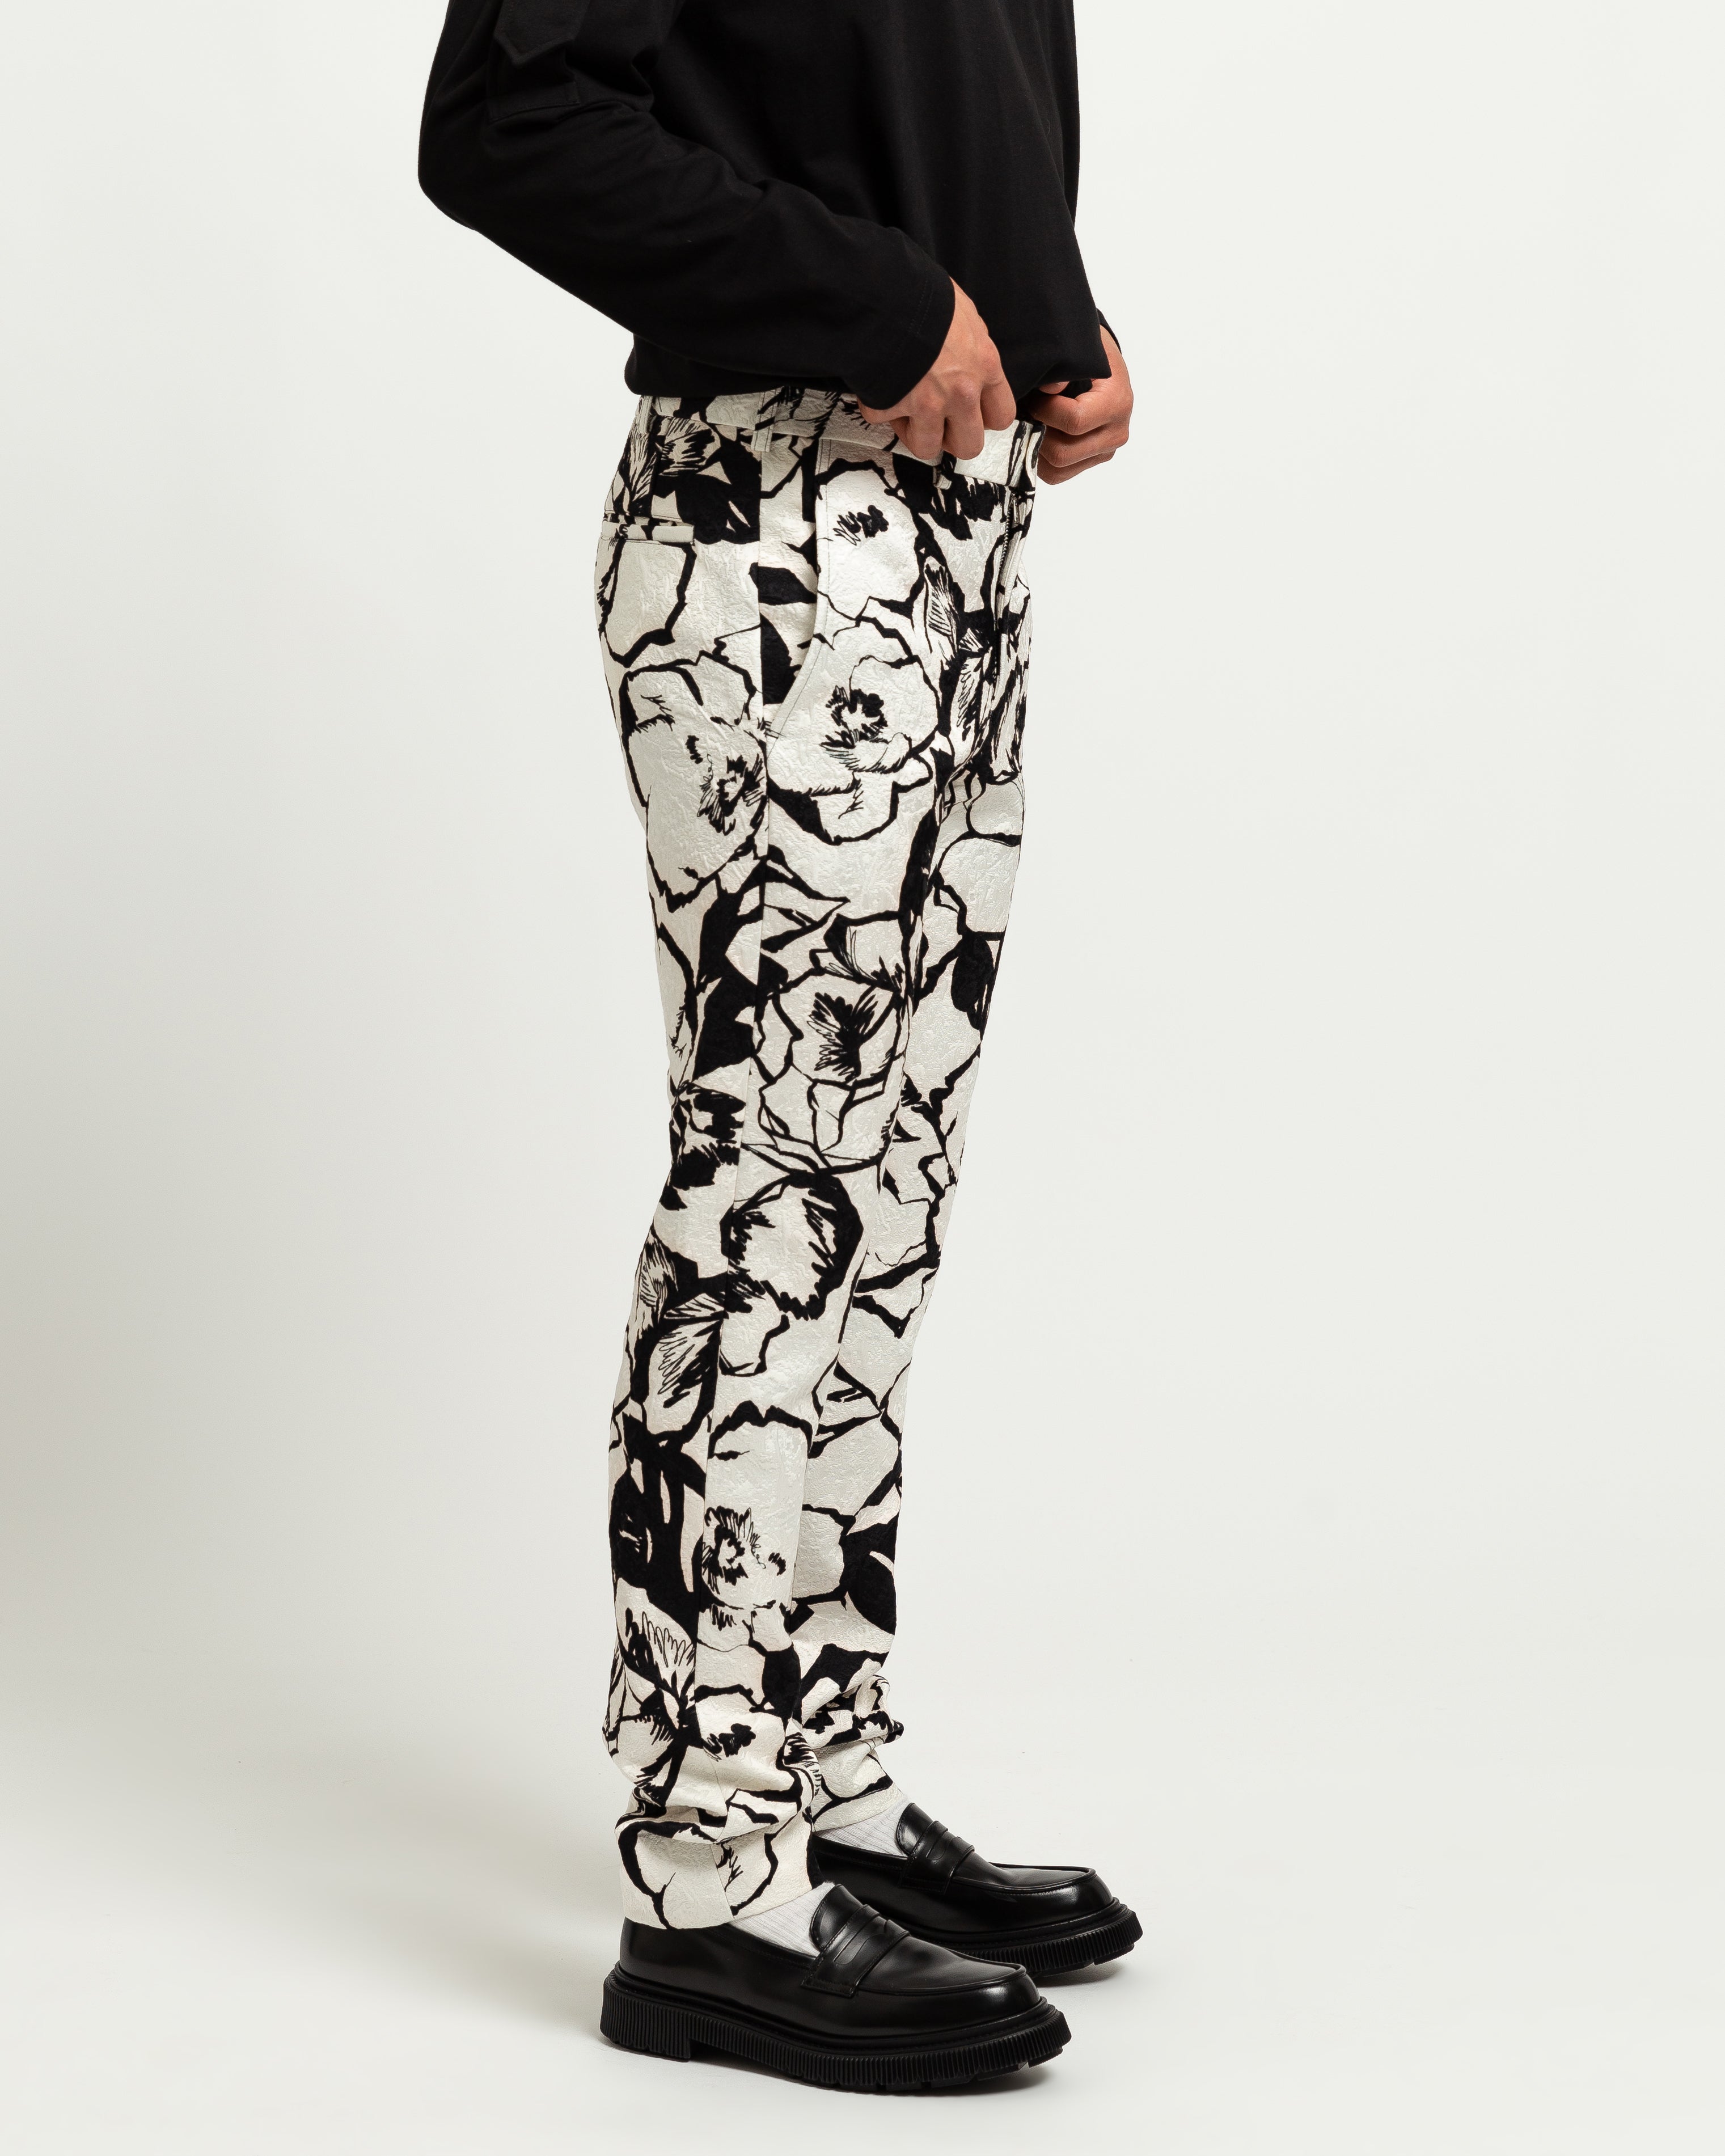 Pants in White/Floral